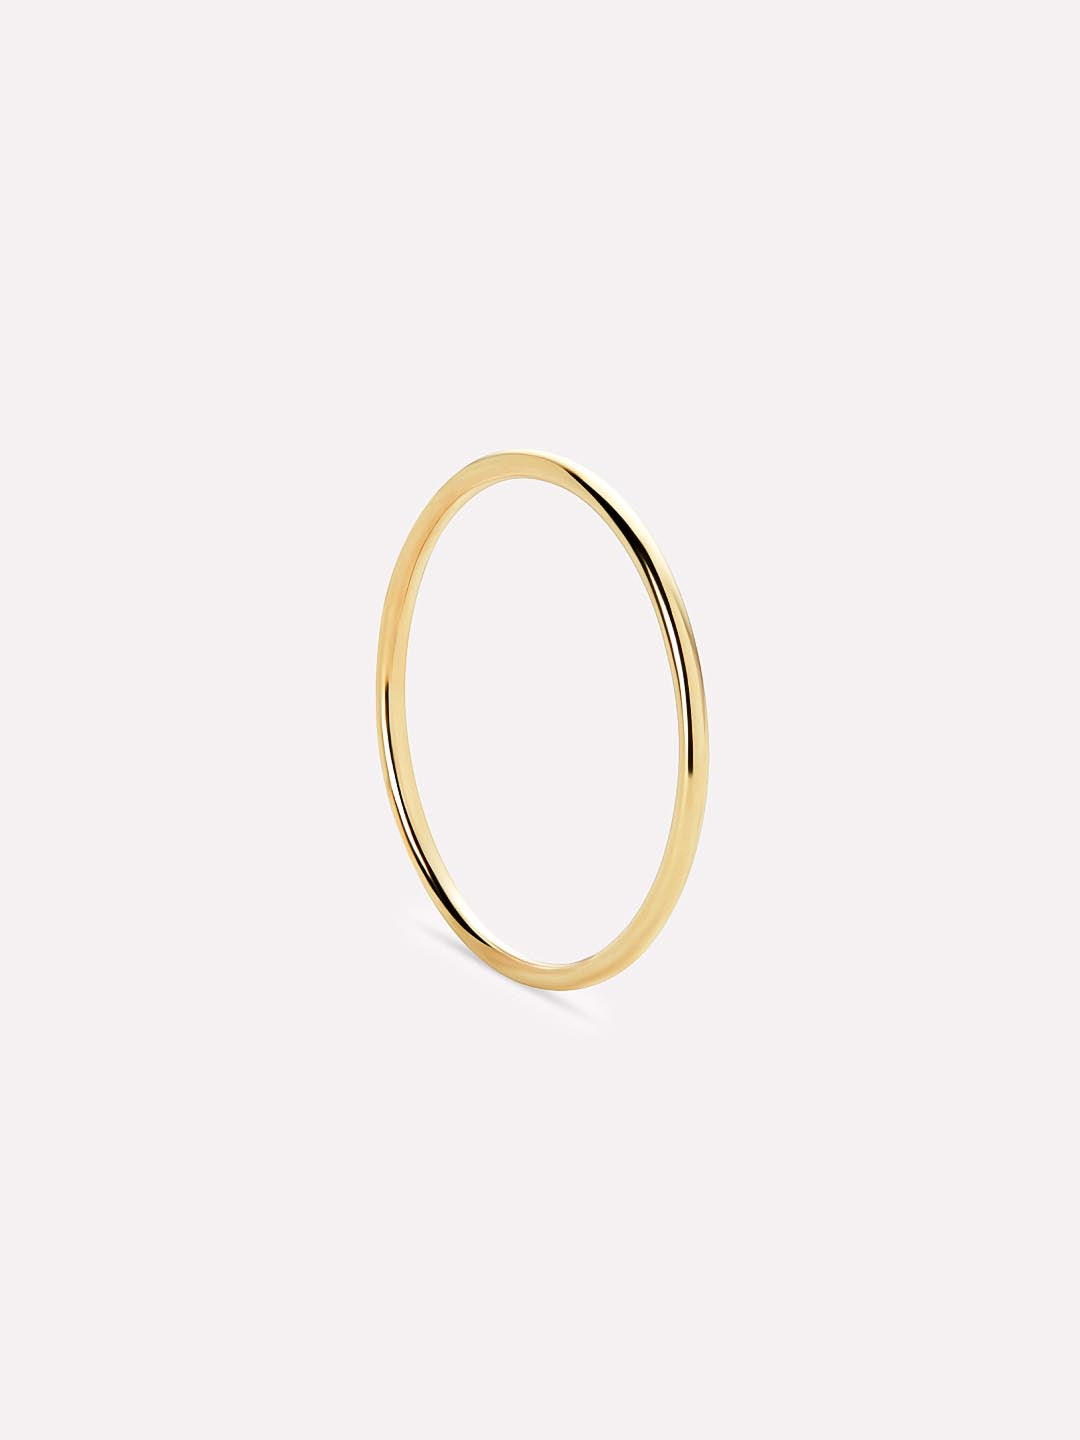 Minimal Thin gold ring, Solid Gold tiny 14k gold ring Band, perfect wedding  ring | MotherNatureJewelry